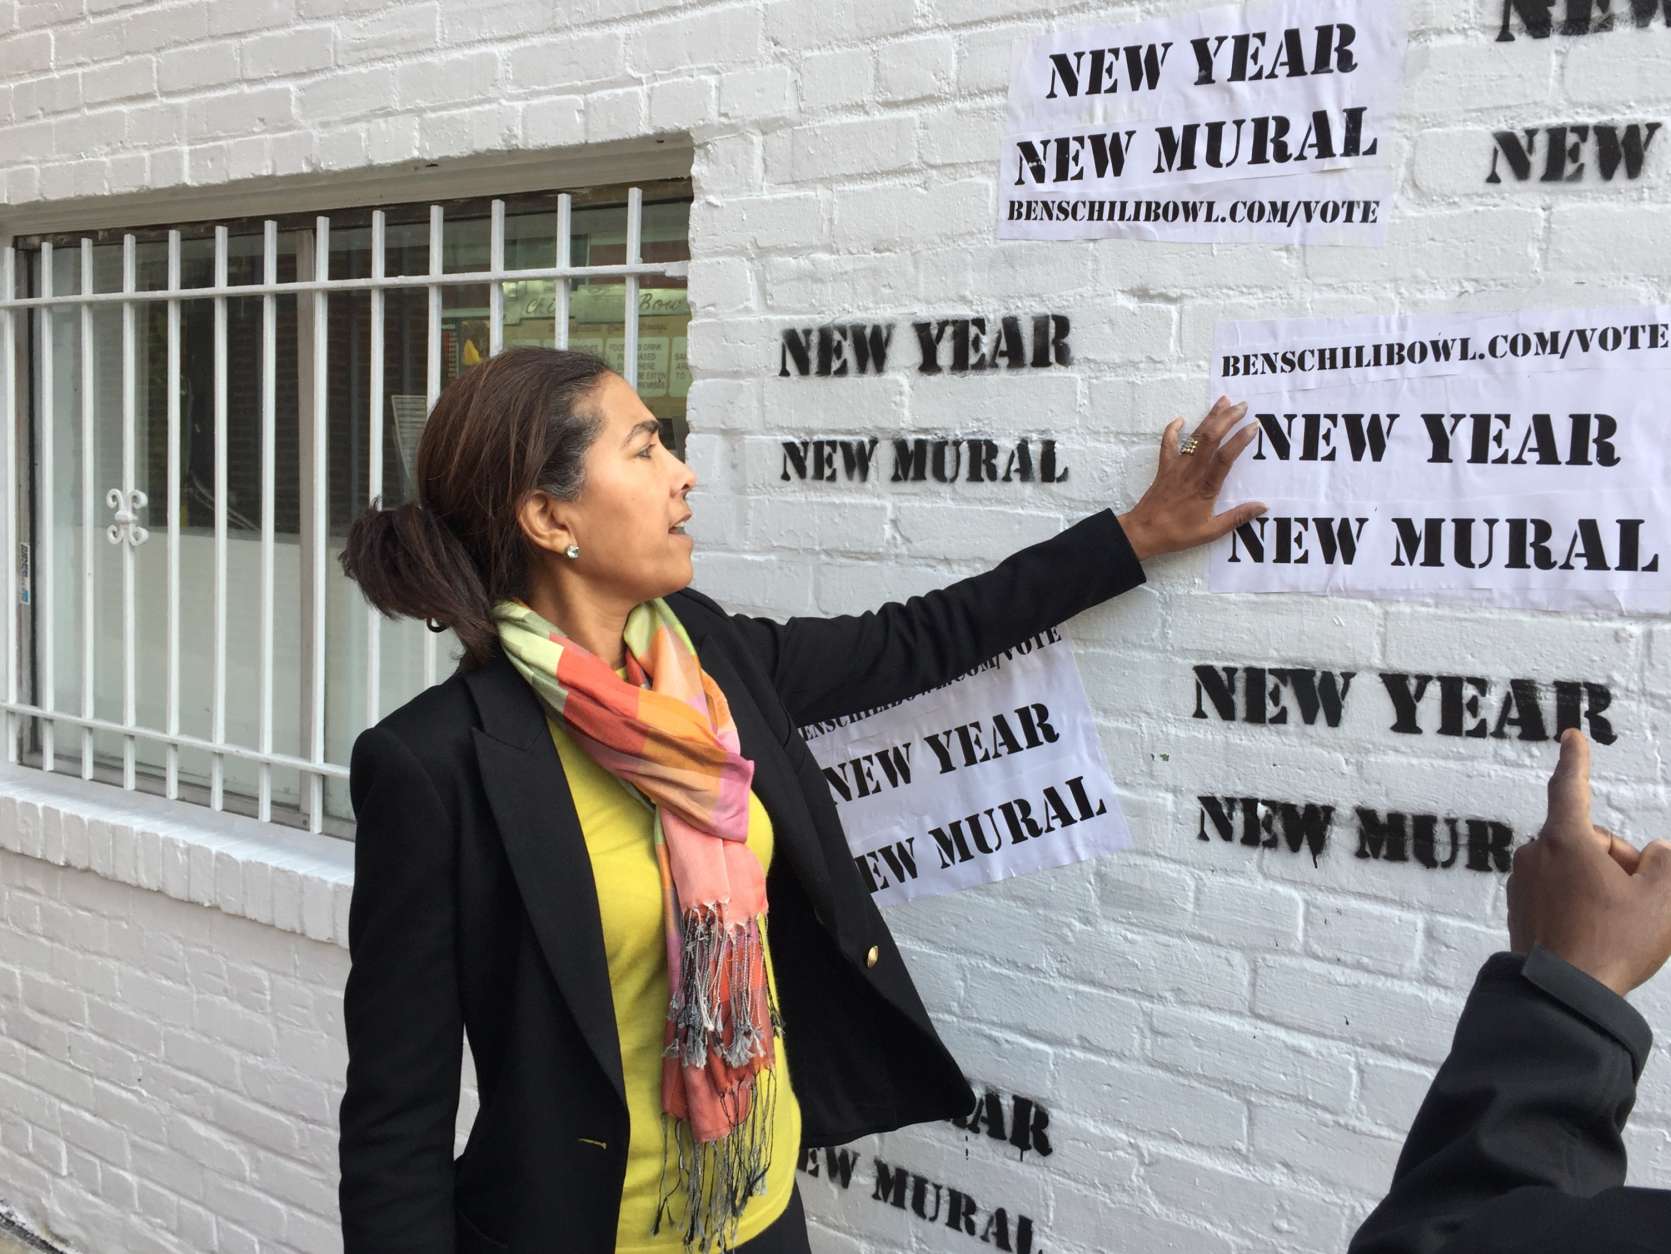 A passerby suggested some kind of "anti-Trump" message be put on the wall, but Sophia Ali, a member of the family that opened the restaurant, said that's not what the effort is about. "This is not about political action," Ali said.  (WTOP/Kristi King)